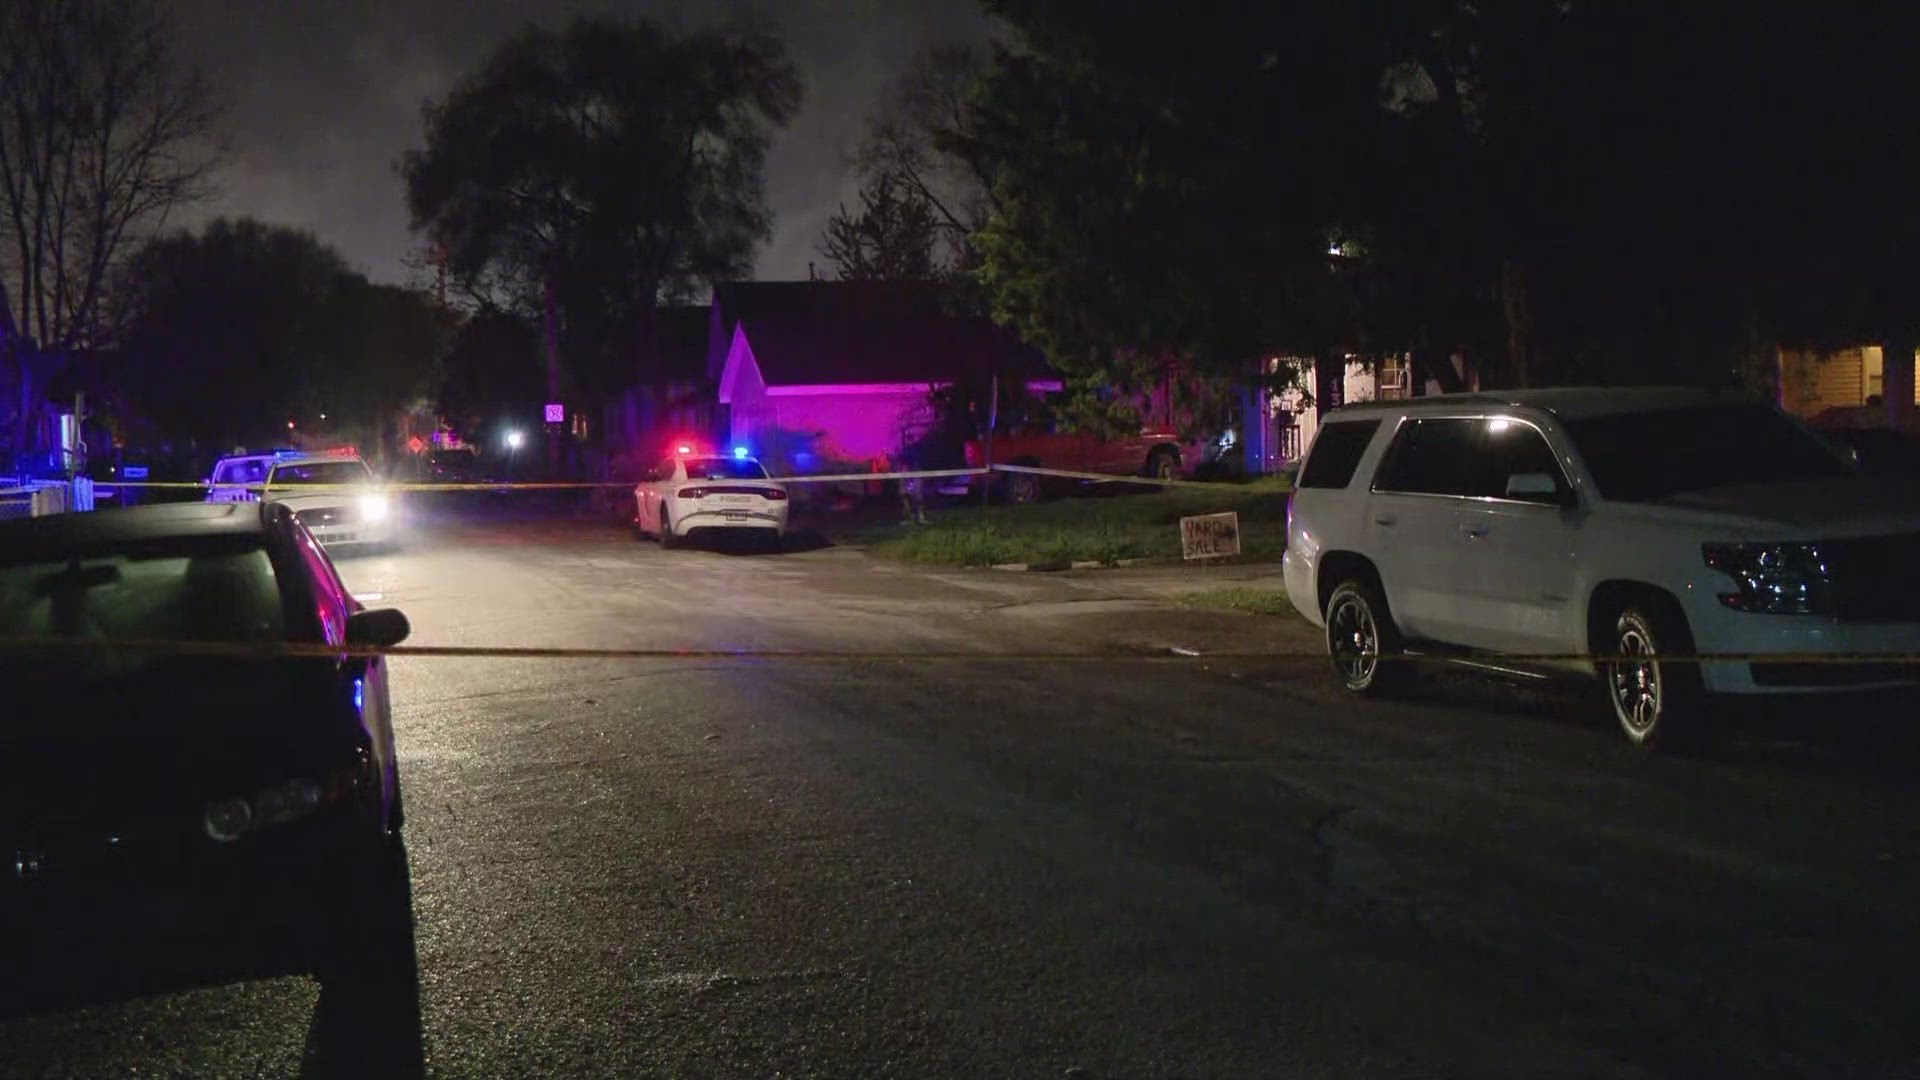 Two people were injured in a shooting that stemmed from a disturbance among family friends Tuesday night on the southwest side of Indianapolis.